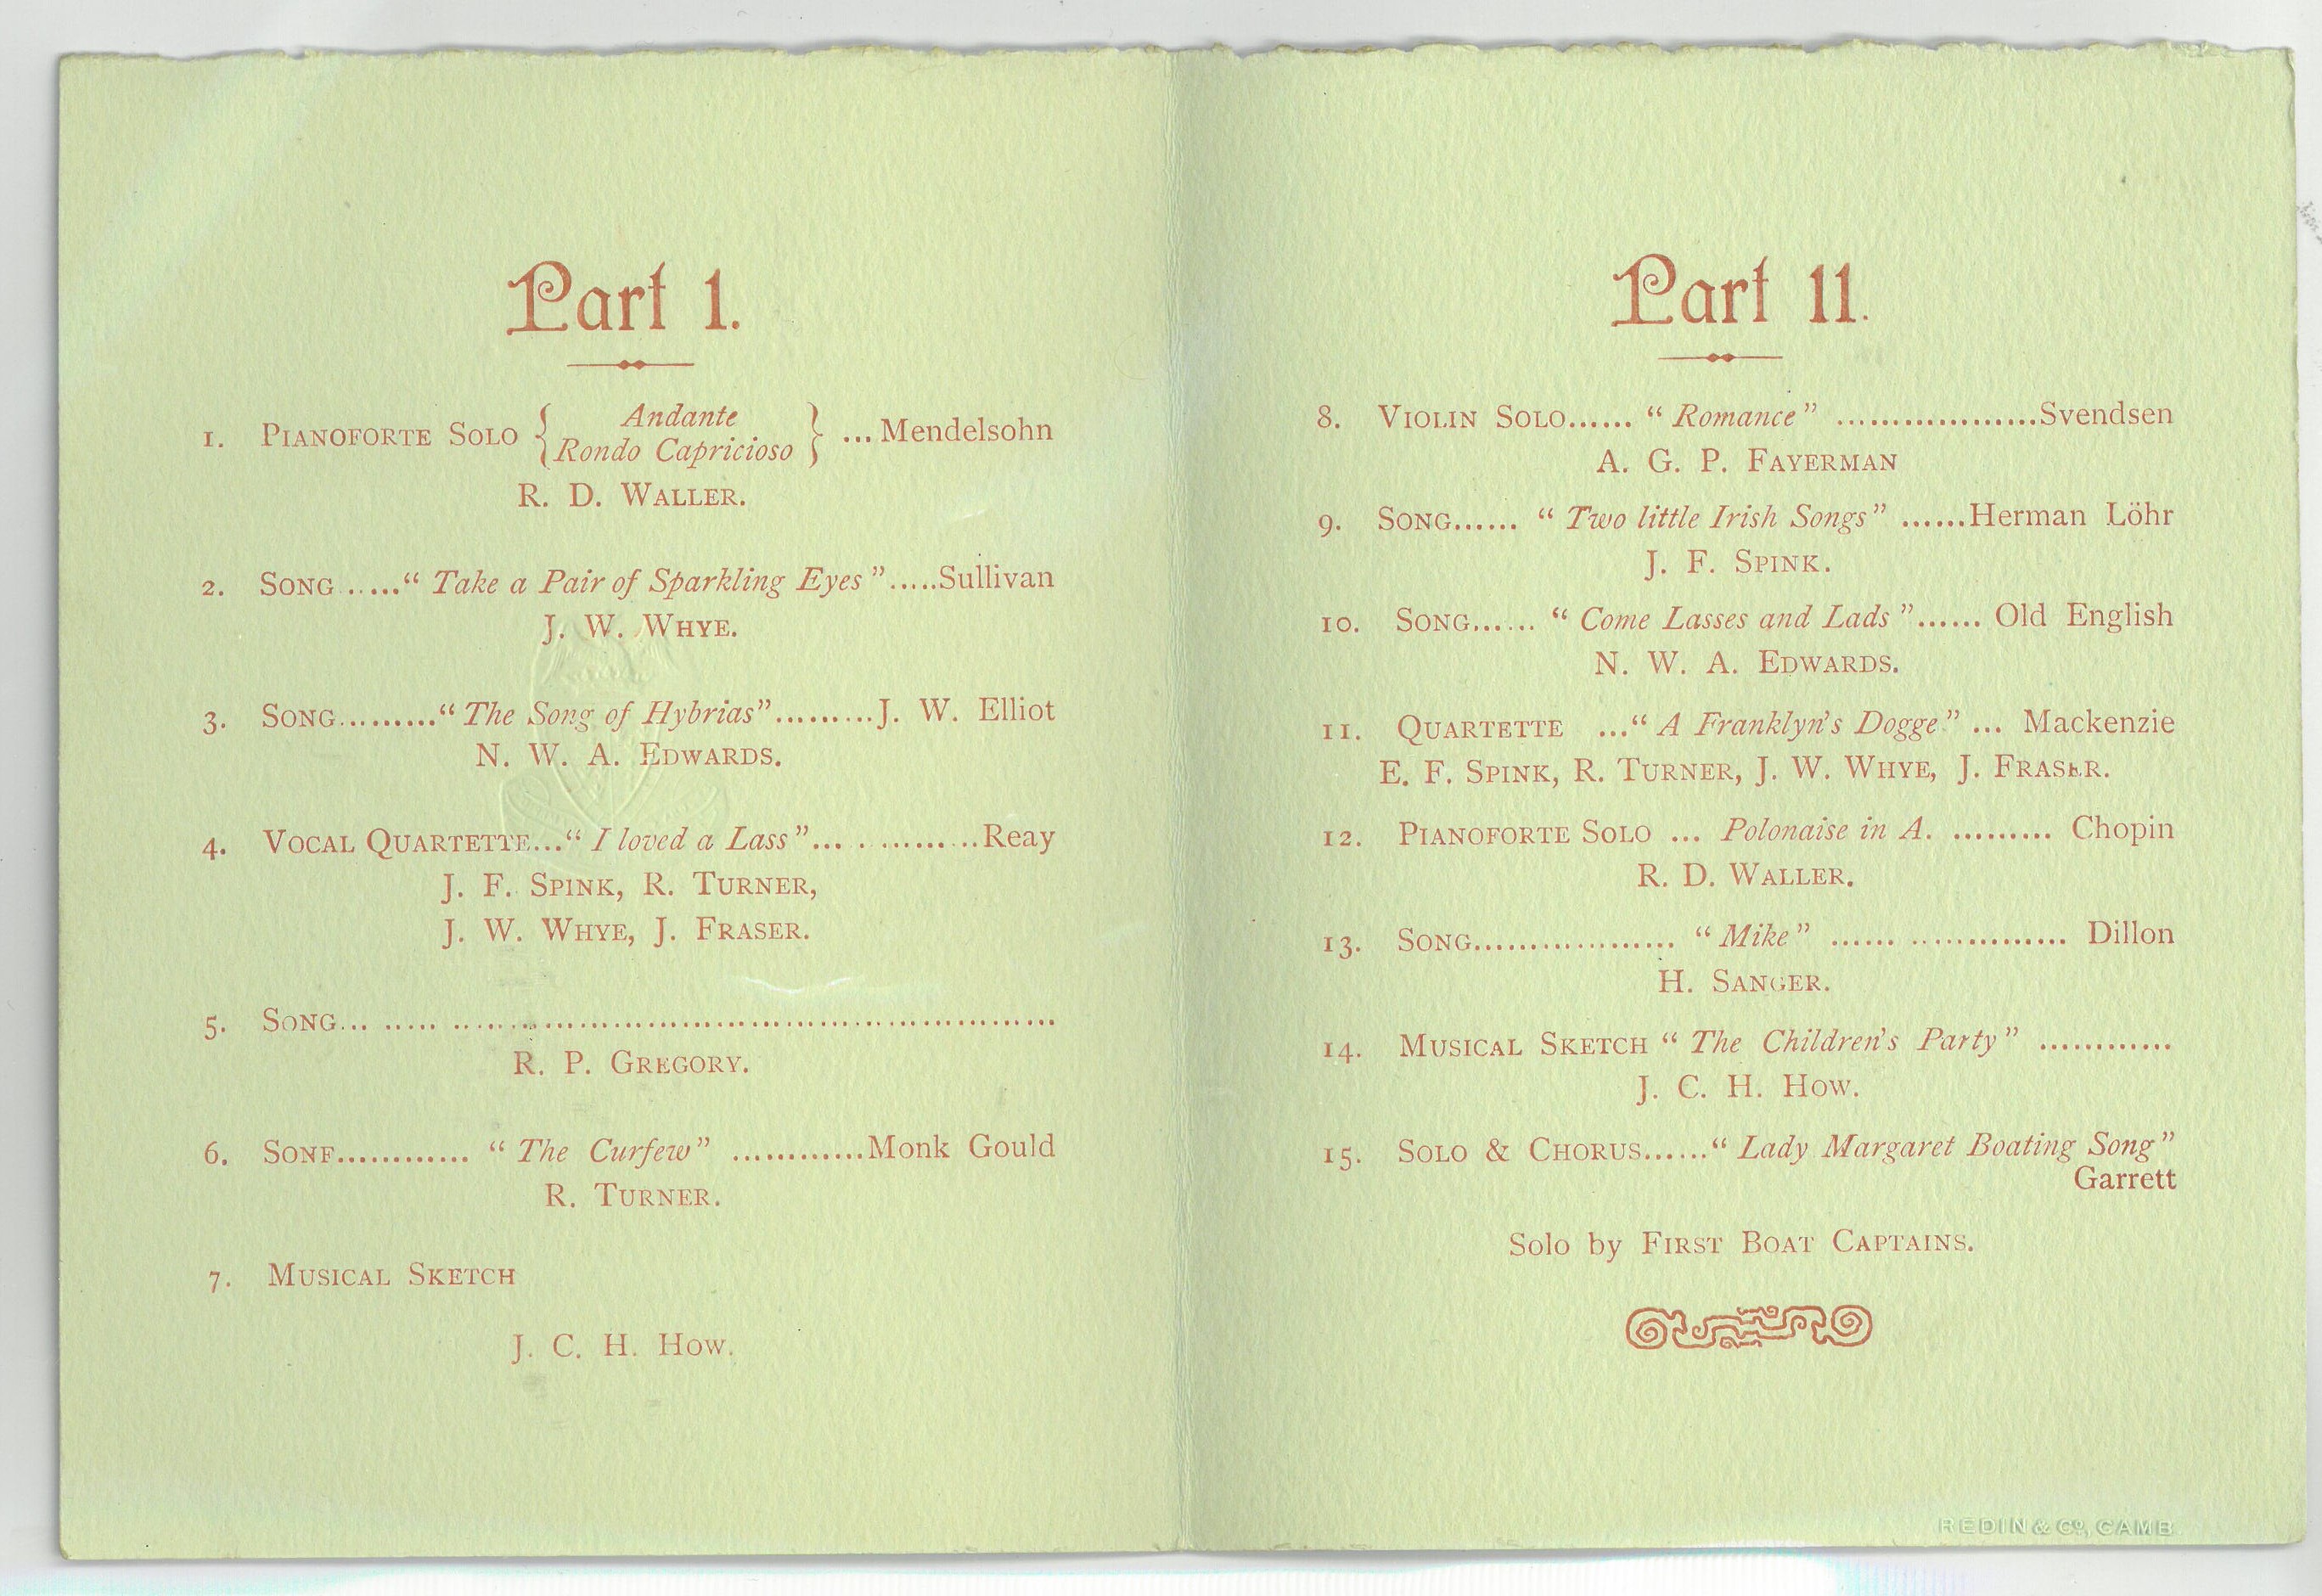 Concert programme, early 1900s